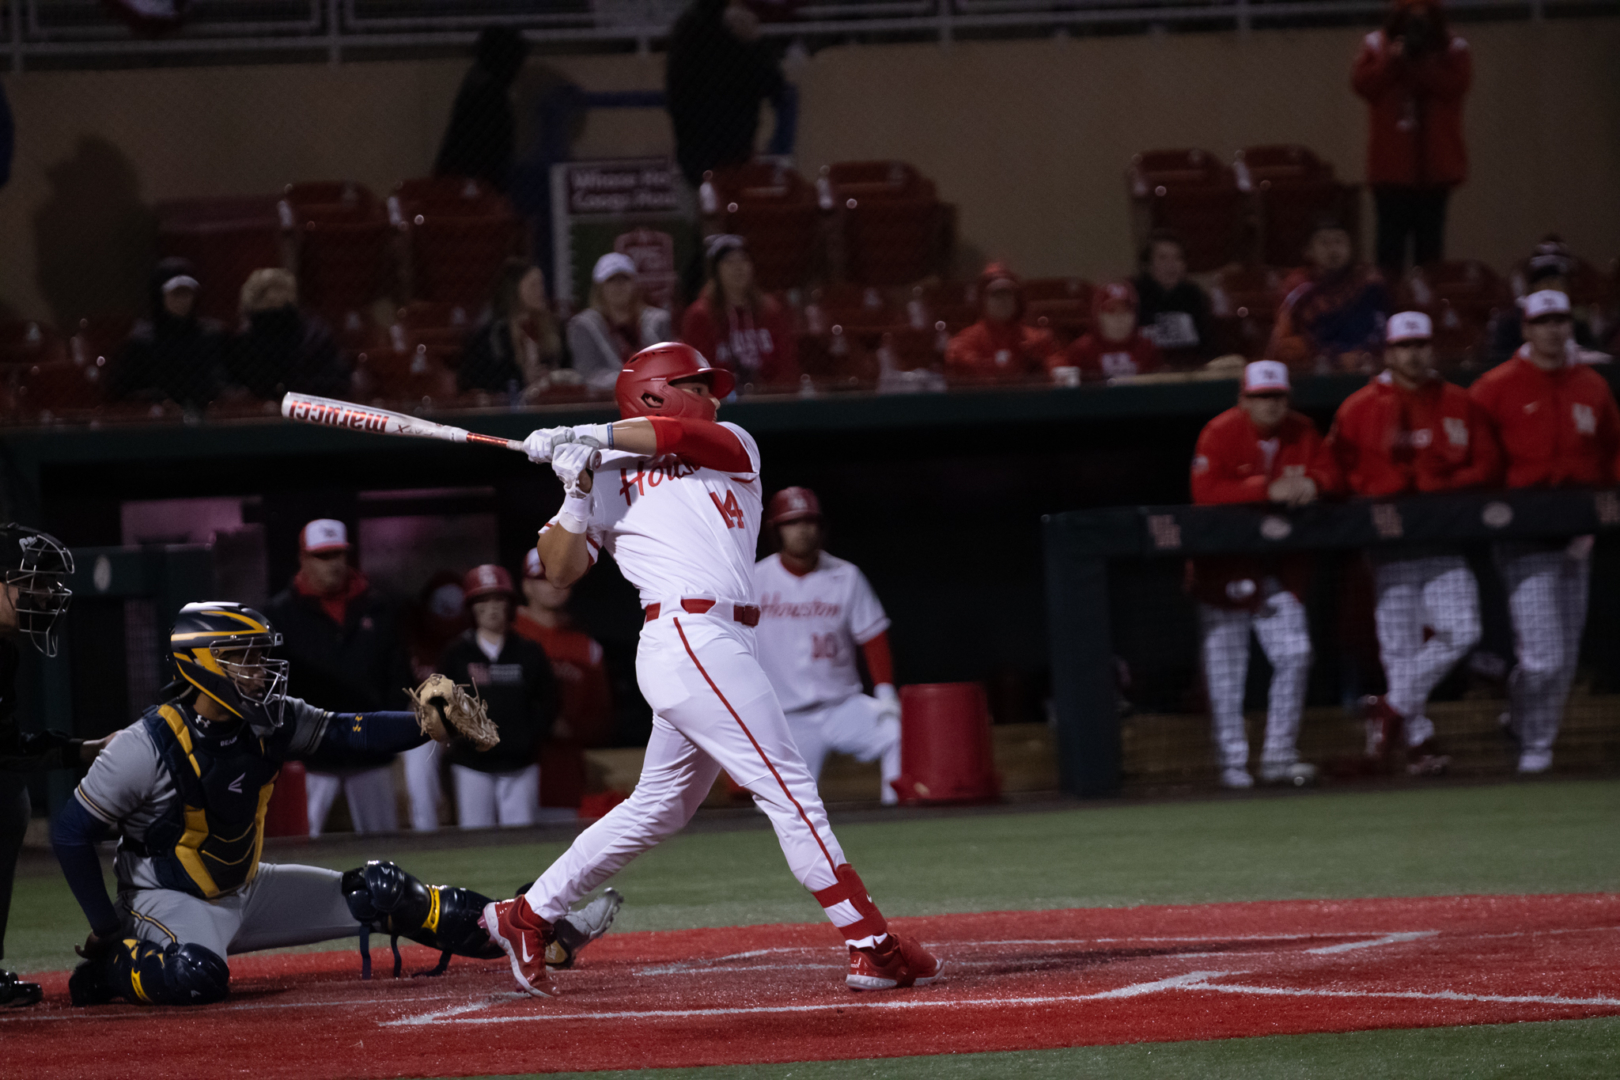 UH fell to 1-3 on the season after getting run-ruled by UTSA on Wednesday night. | Raphael Fernandez/The Cougar